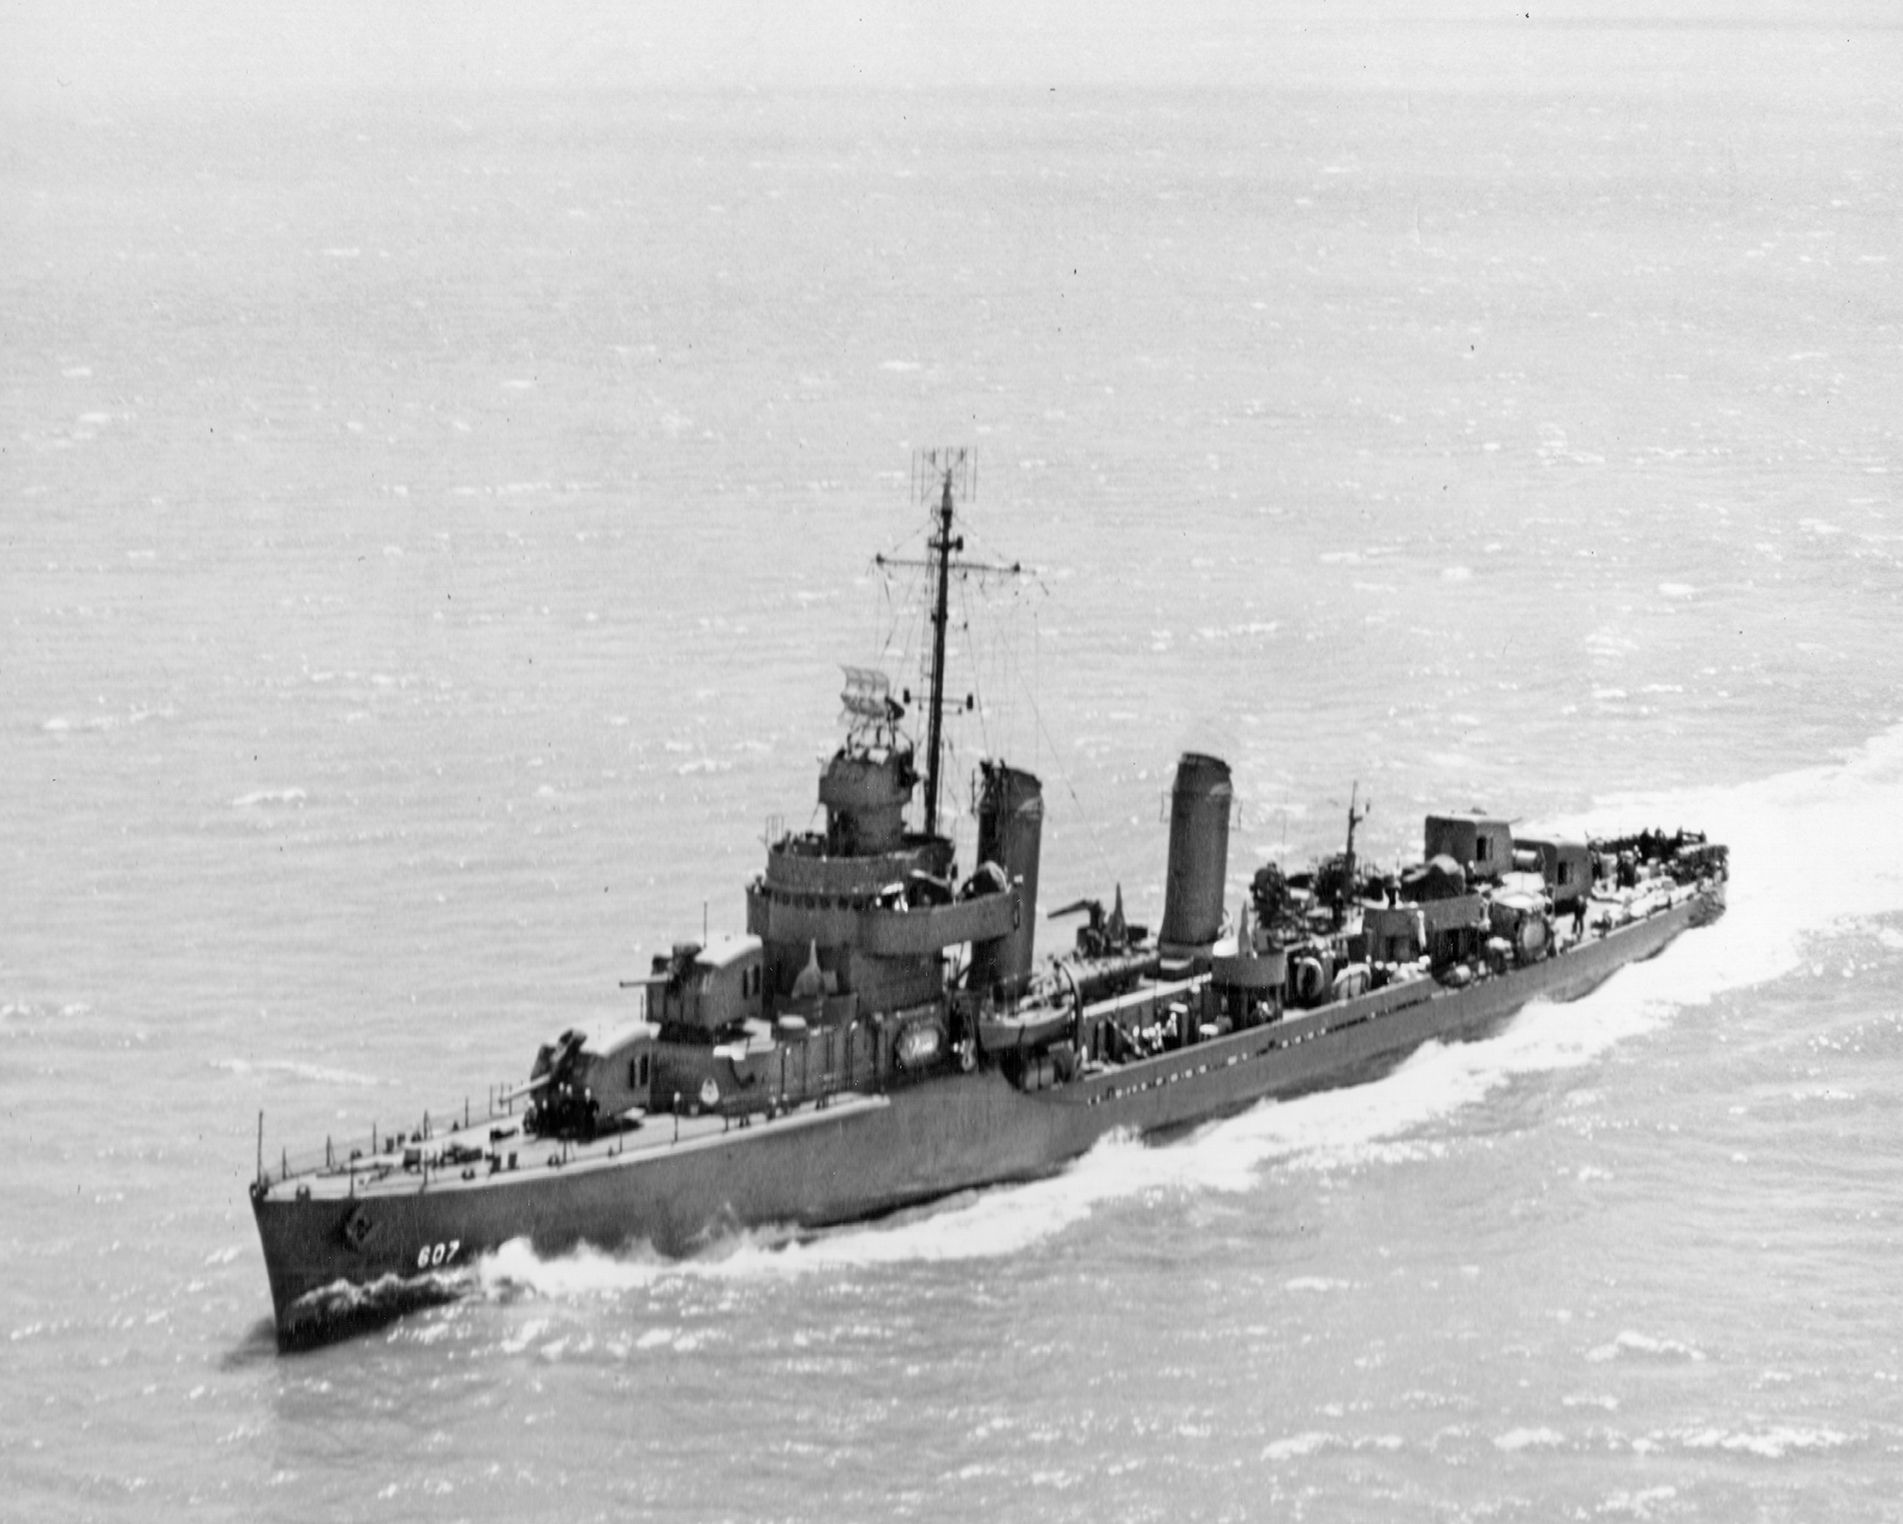 The destroyer USS Frazier is shown coursing through San Francisco Bay in August 1942. Frazier joined in the pursuit and sinking of the Japanese submarine I-35 off Tarawa in November 1943.